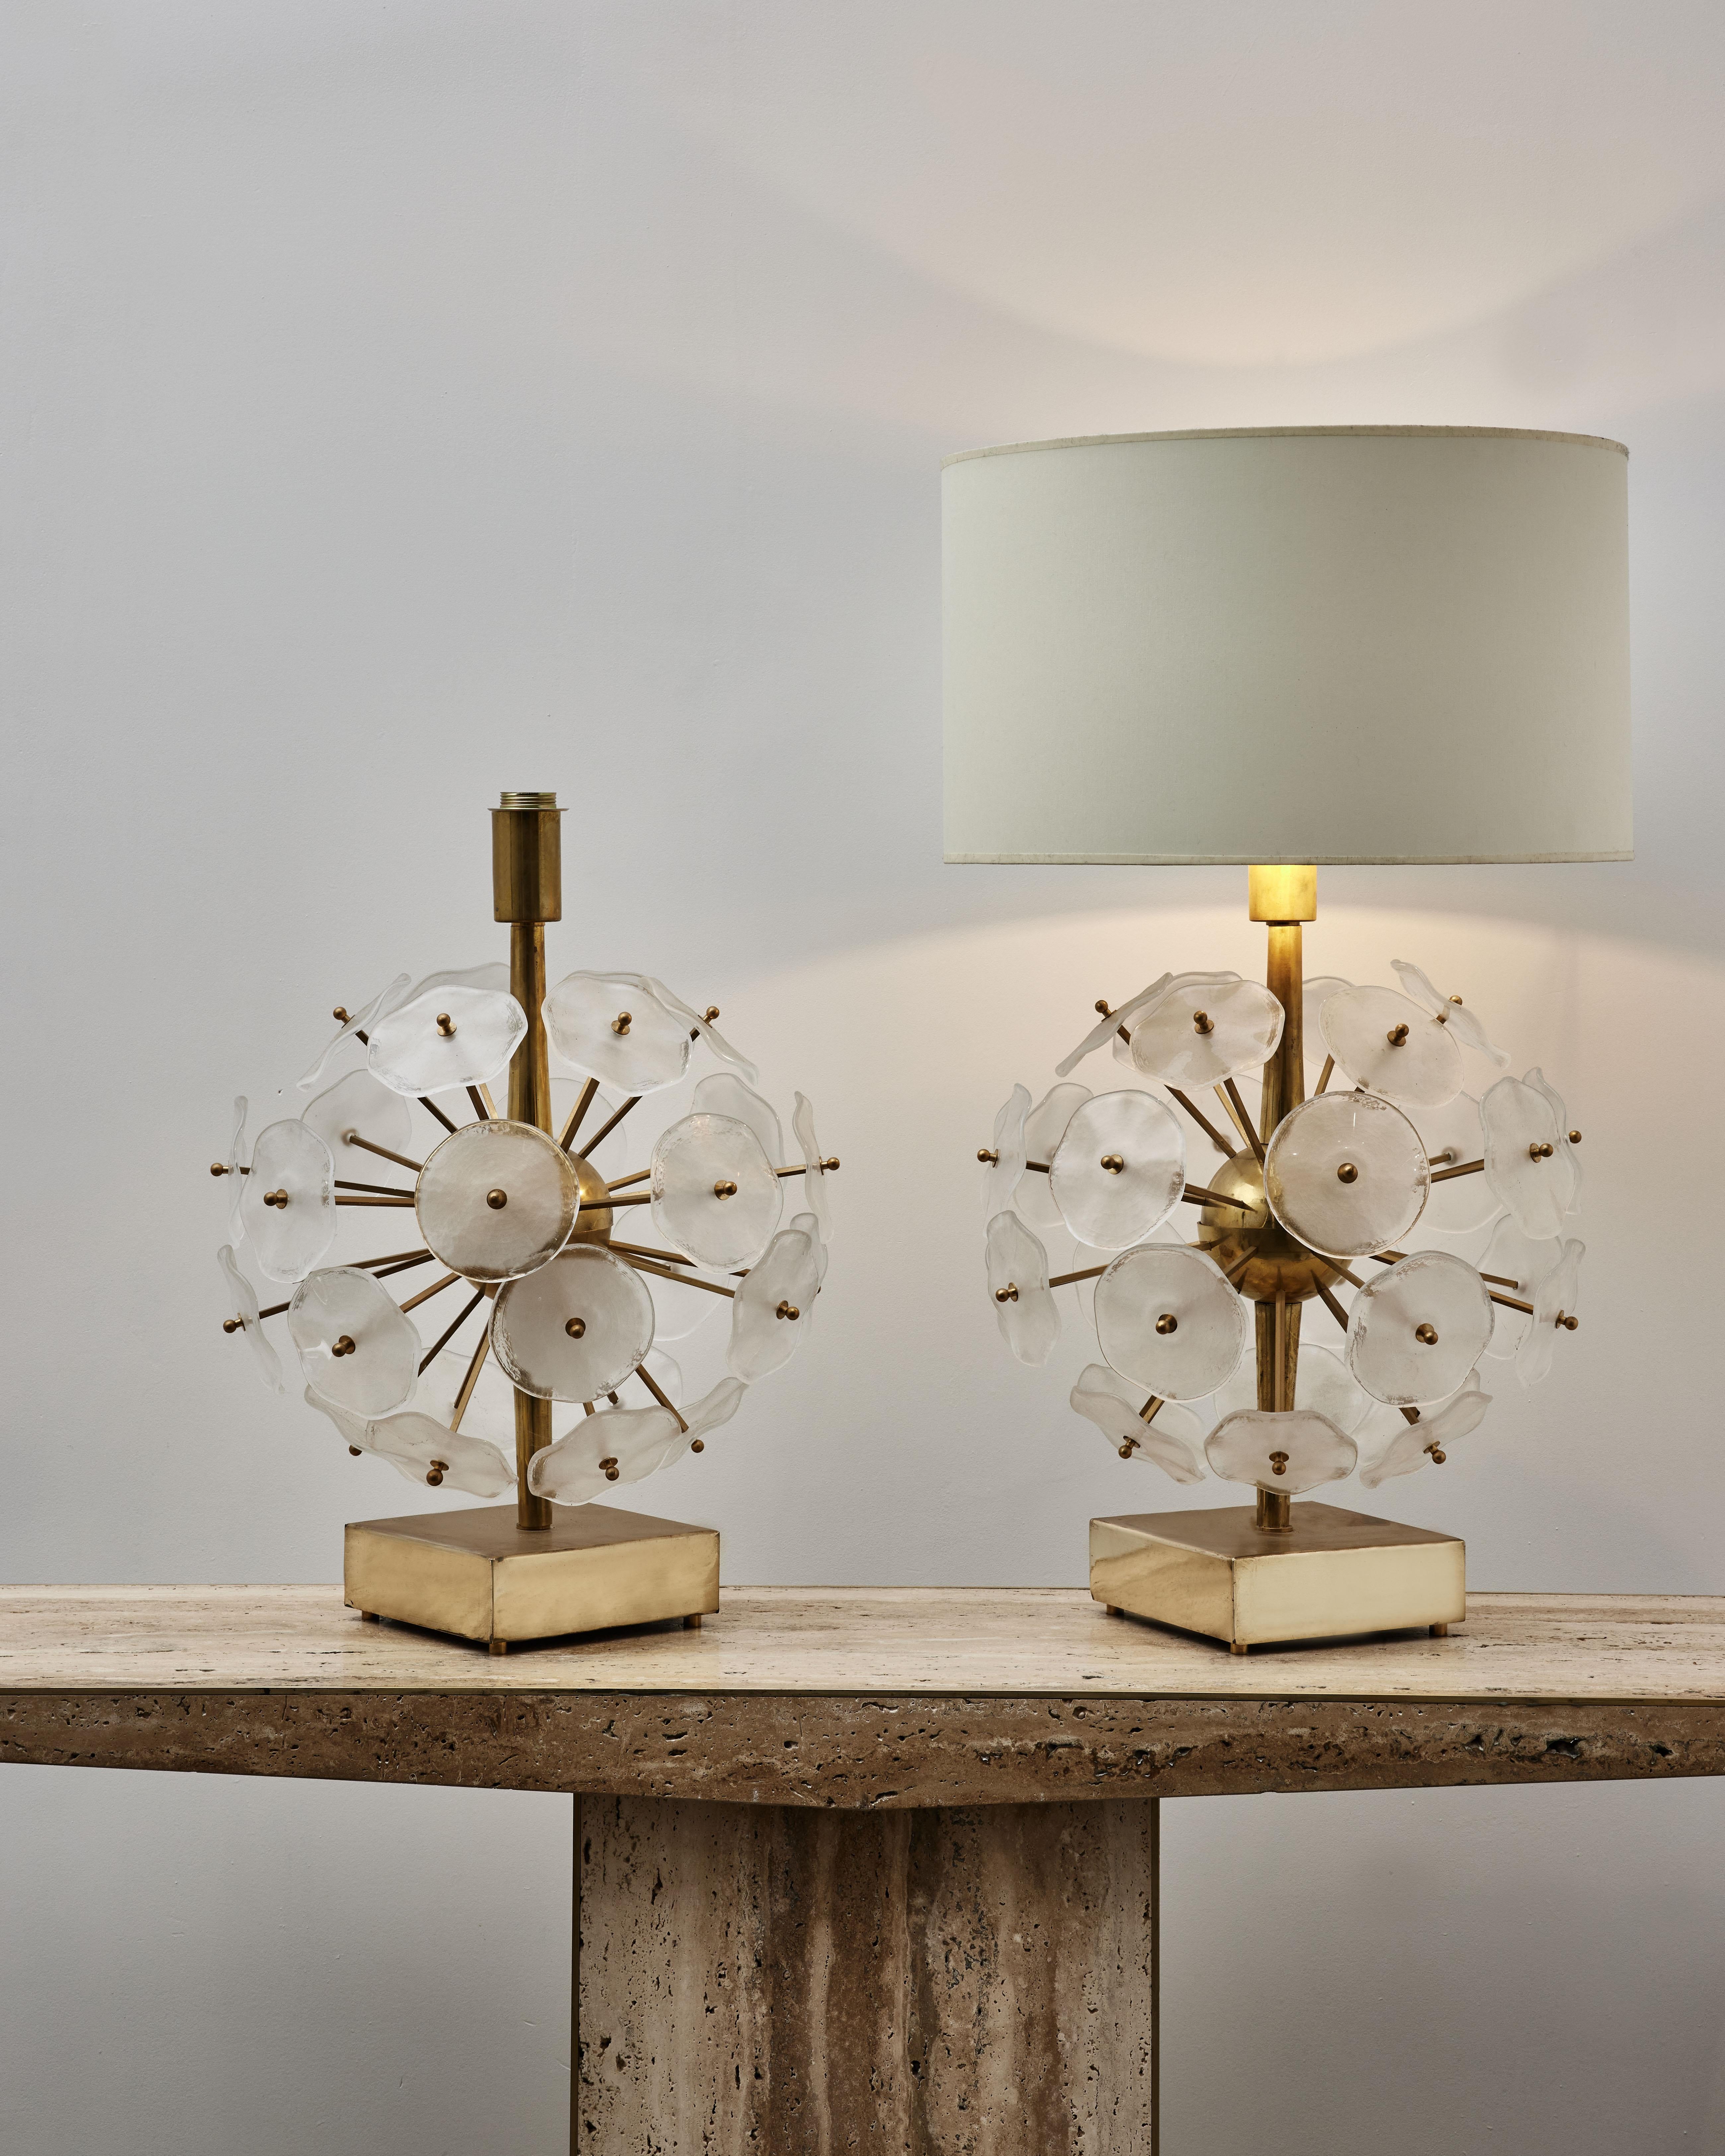 Pair of sputnik tables lamps in brass with Murano glasses.
Italy, 1980s.

Dimensions: Ø 50 x H 63 cm
(Price and dimensions without shade).